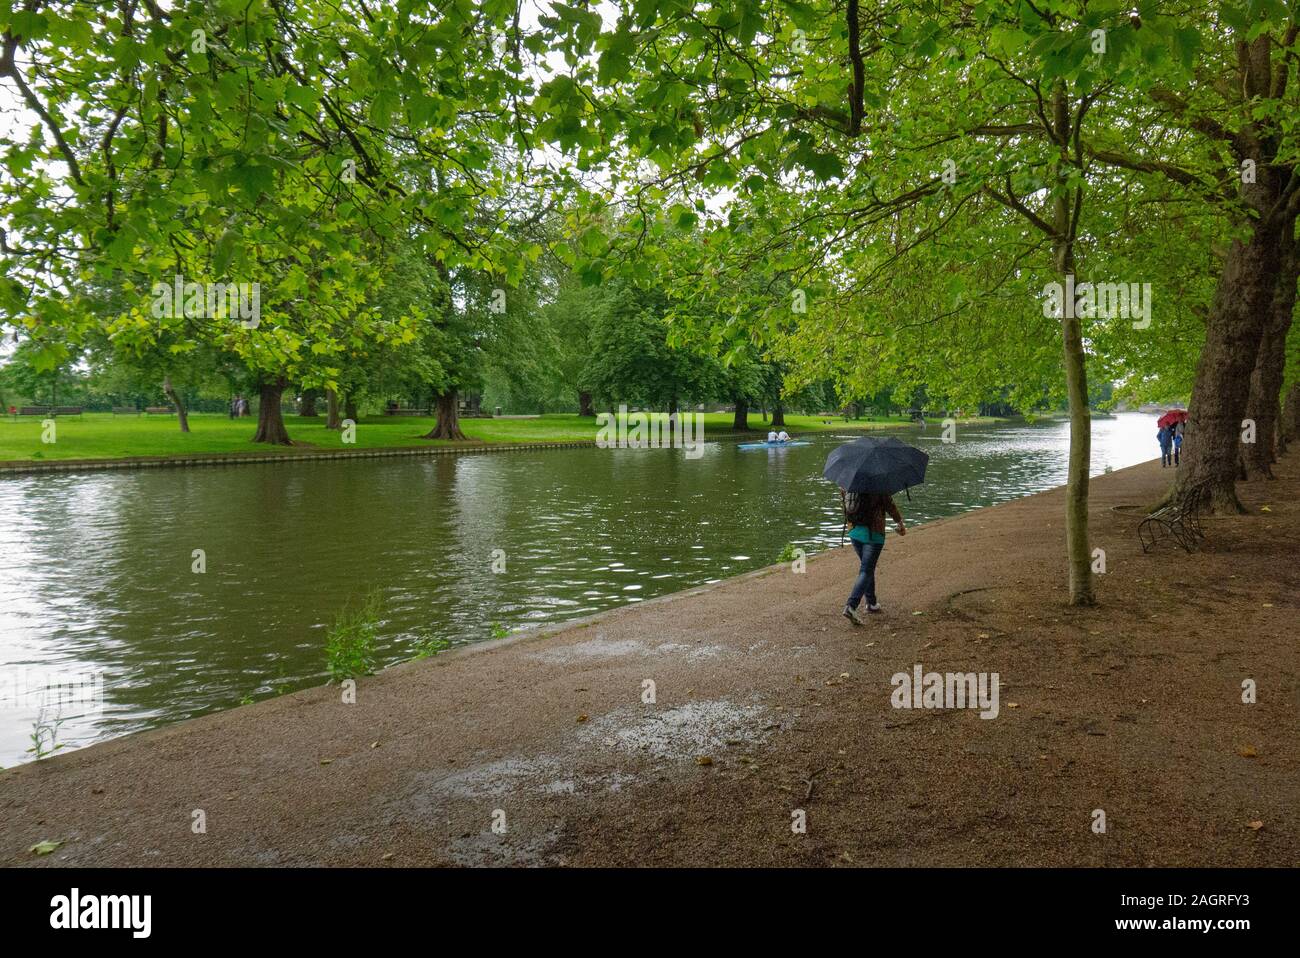 BEDFORD, UK - 21 June 2012: A pedestrain walks on a wet summer day on The Embankment of the Great River Ouse in Bedford England UK Stock Photo